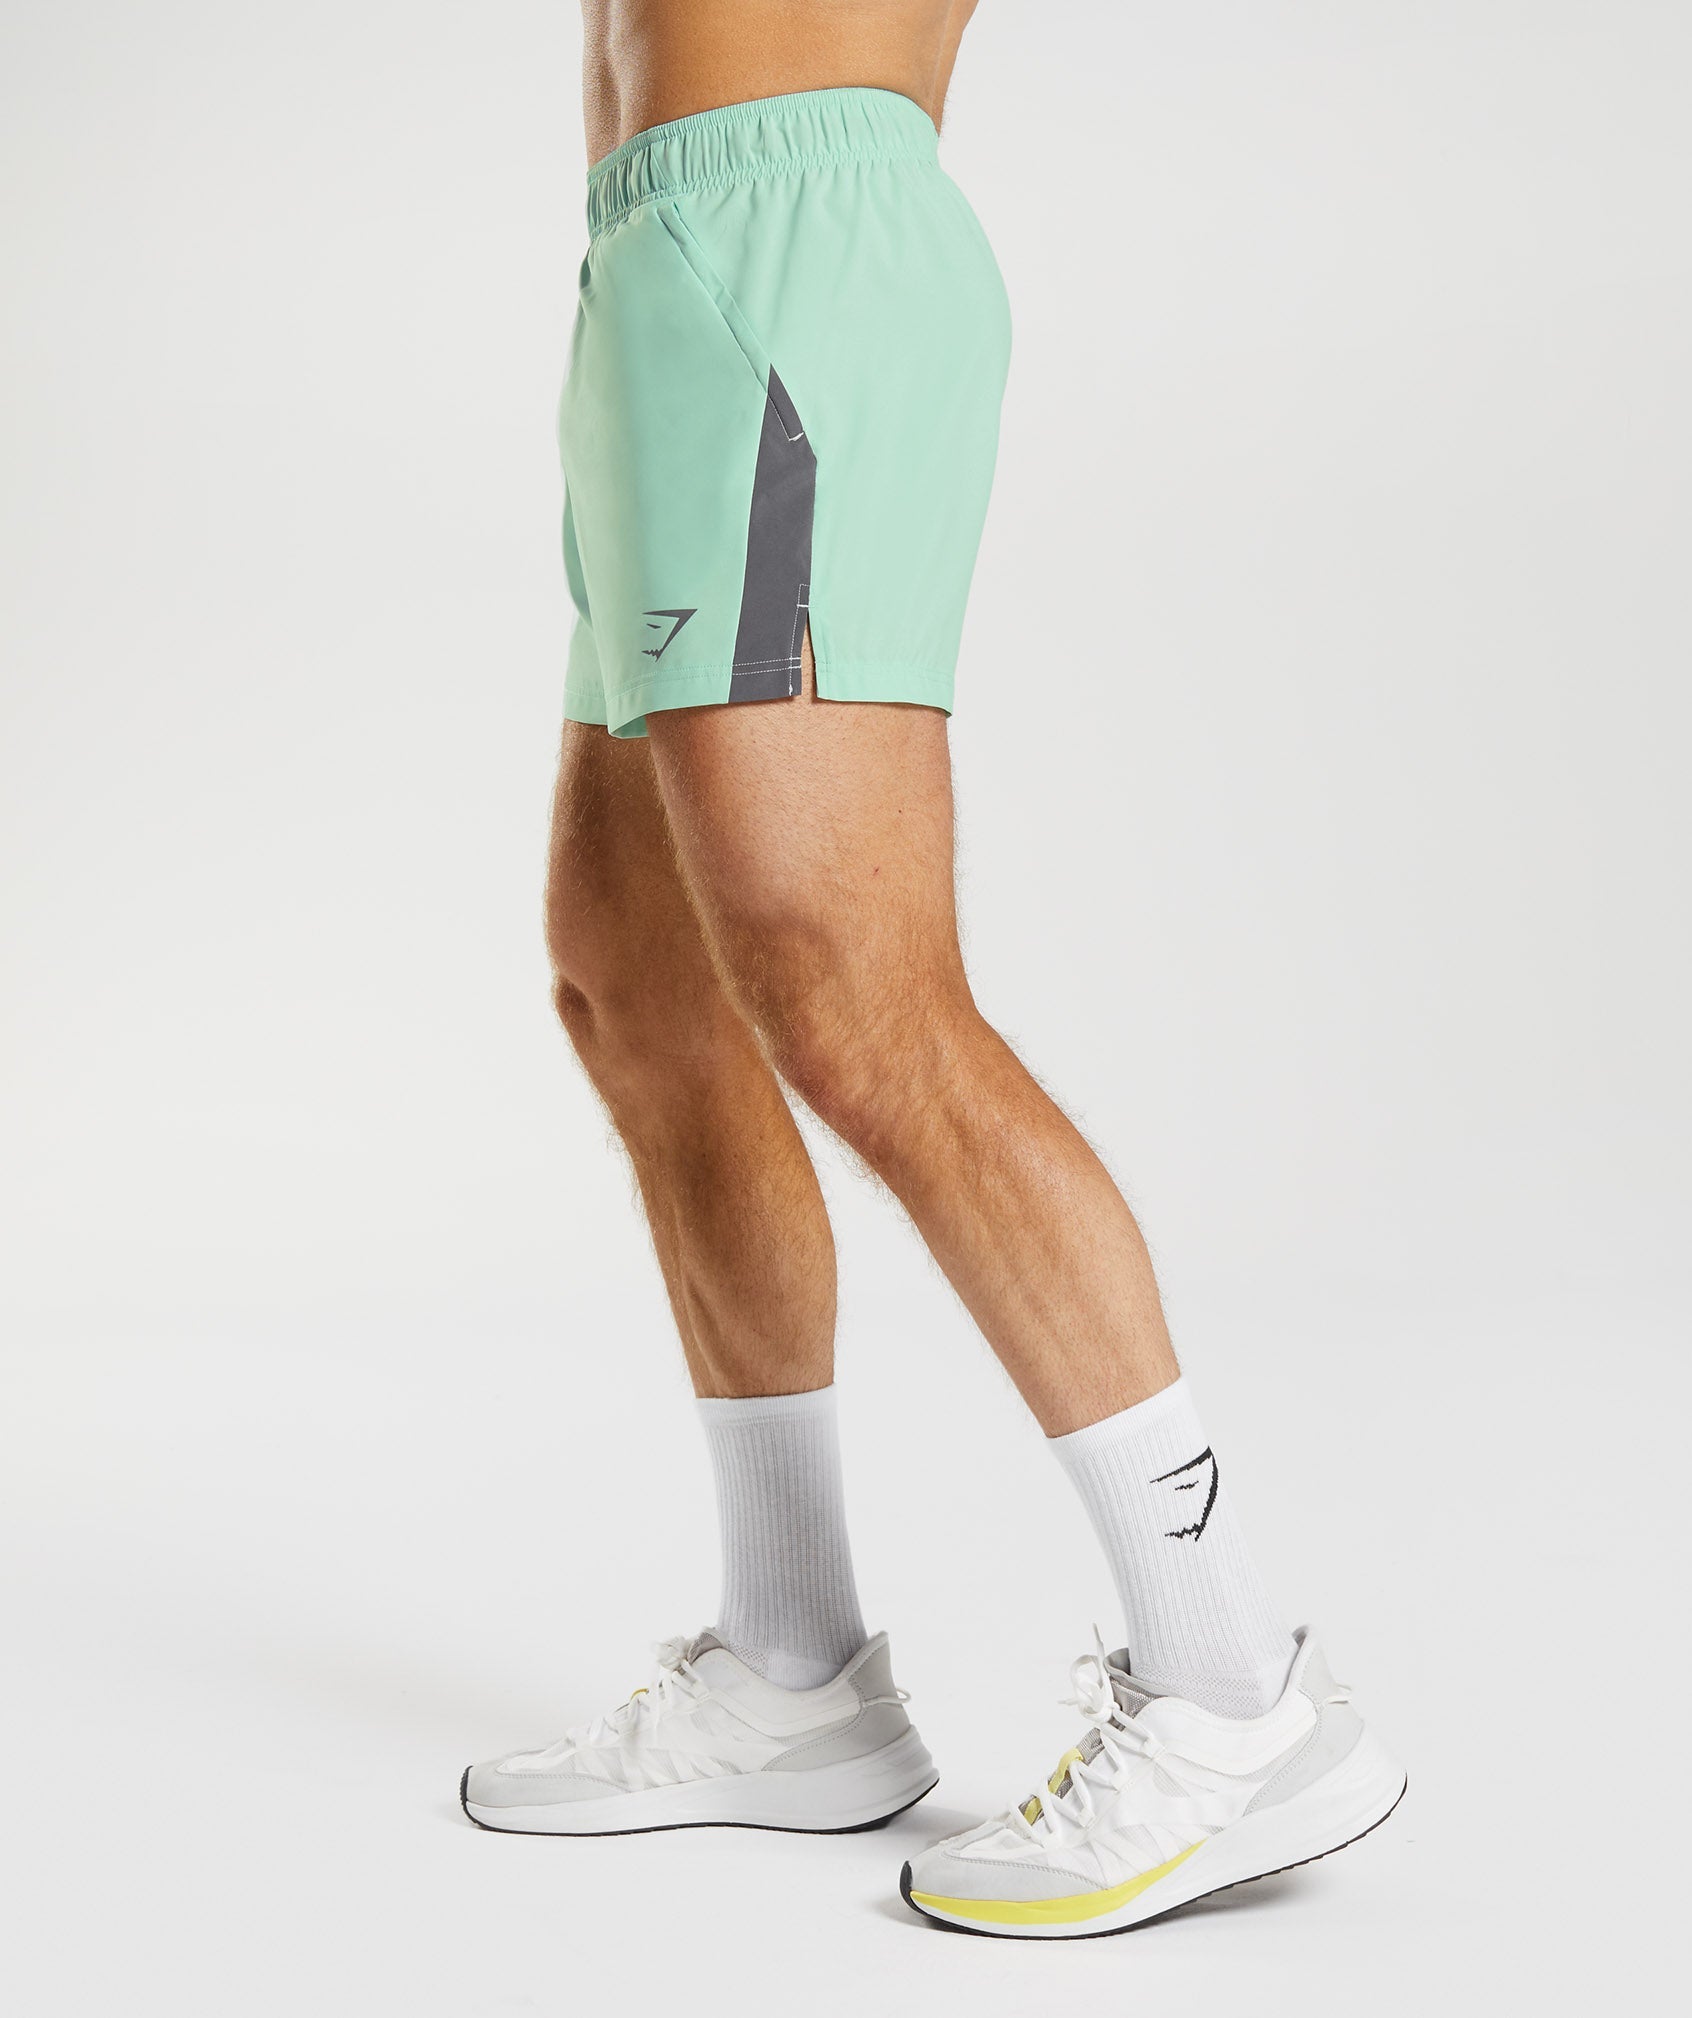 Sport 5" Shorts in Pastel Green/Silhouette Grey - view 3